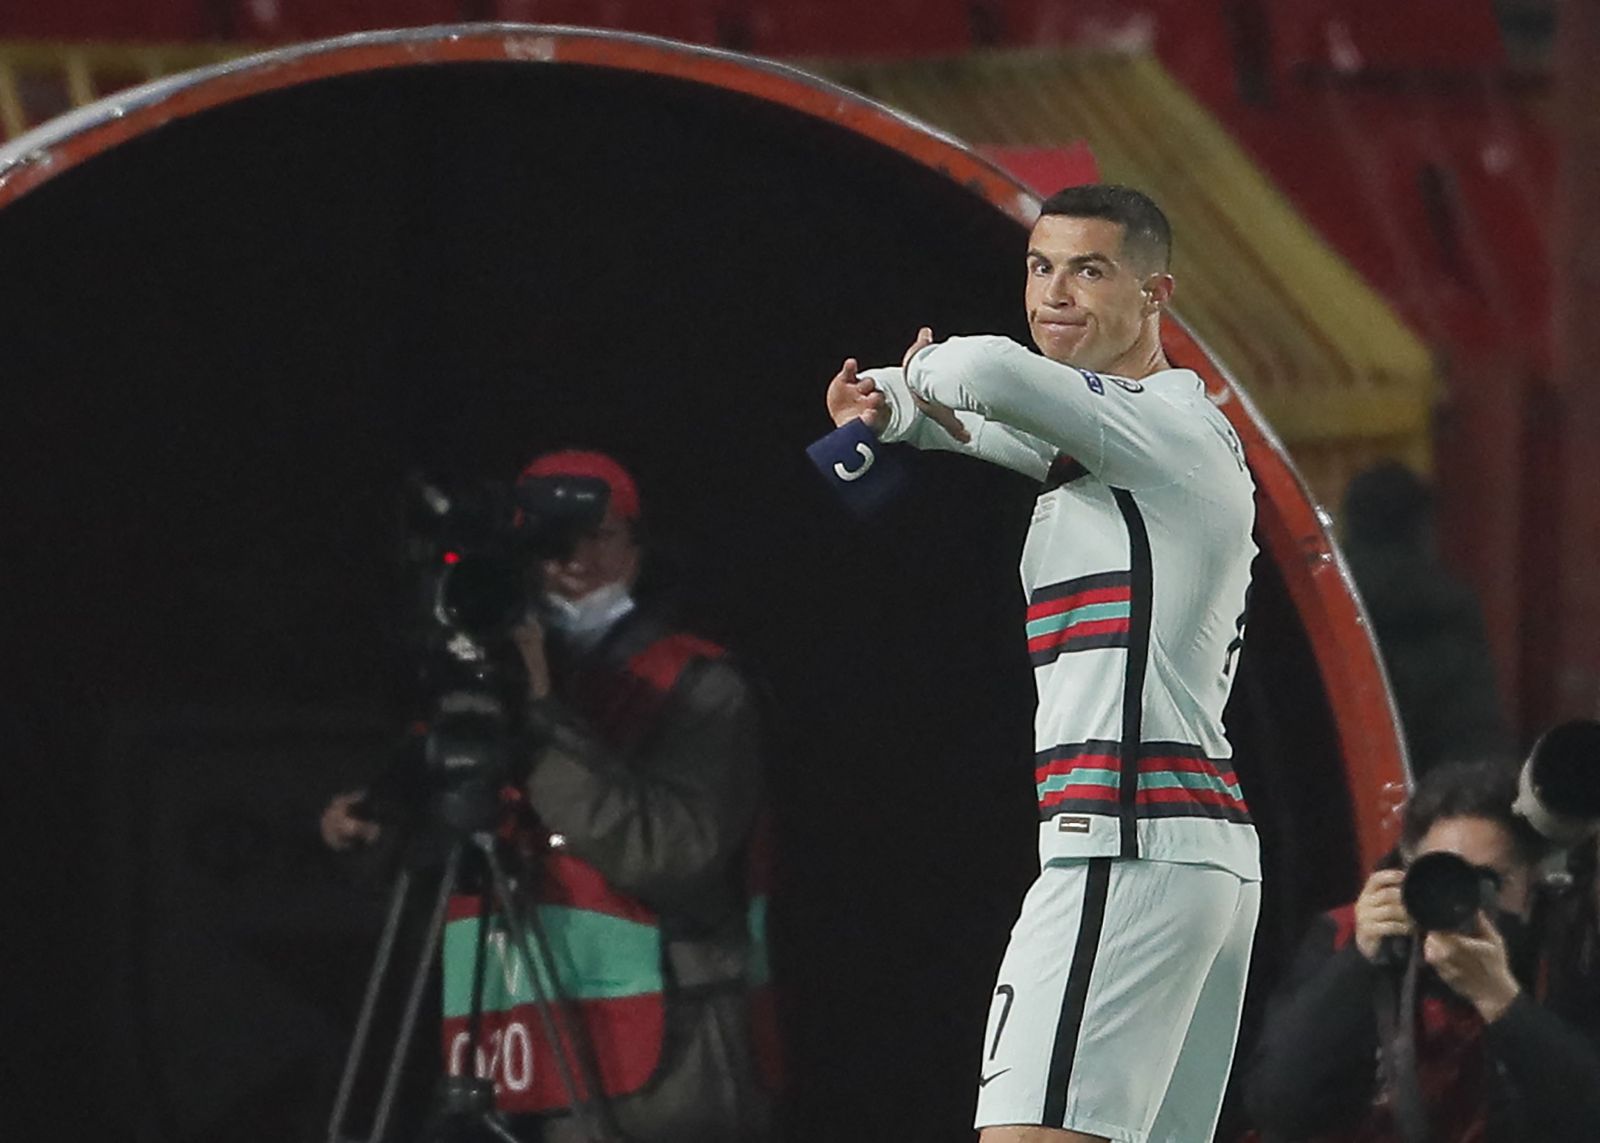 Portugal's forward Cristiano Ronaldo holds his captain armband moments before he threw it to the ground and left the pitch at the end of the FIFA World Cup Qatar 2022 qualification Group A football match between Serbia and Portugal at the Rajko Mitic Stadium, in Belgrade, on March 27, 2021. - Cristiano Ronaldo threw his captain's armband to the ground in anger after being controversially denied an injury-time winner as Portugal blew a two-goal lead against Serbia in World Cup qualifying. (Photo by pedja milosavljevic / AFP) - AFP